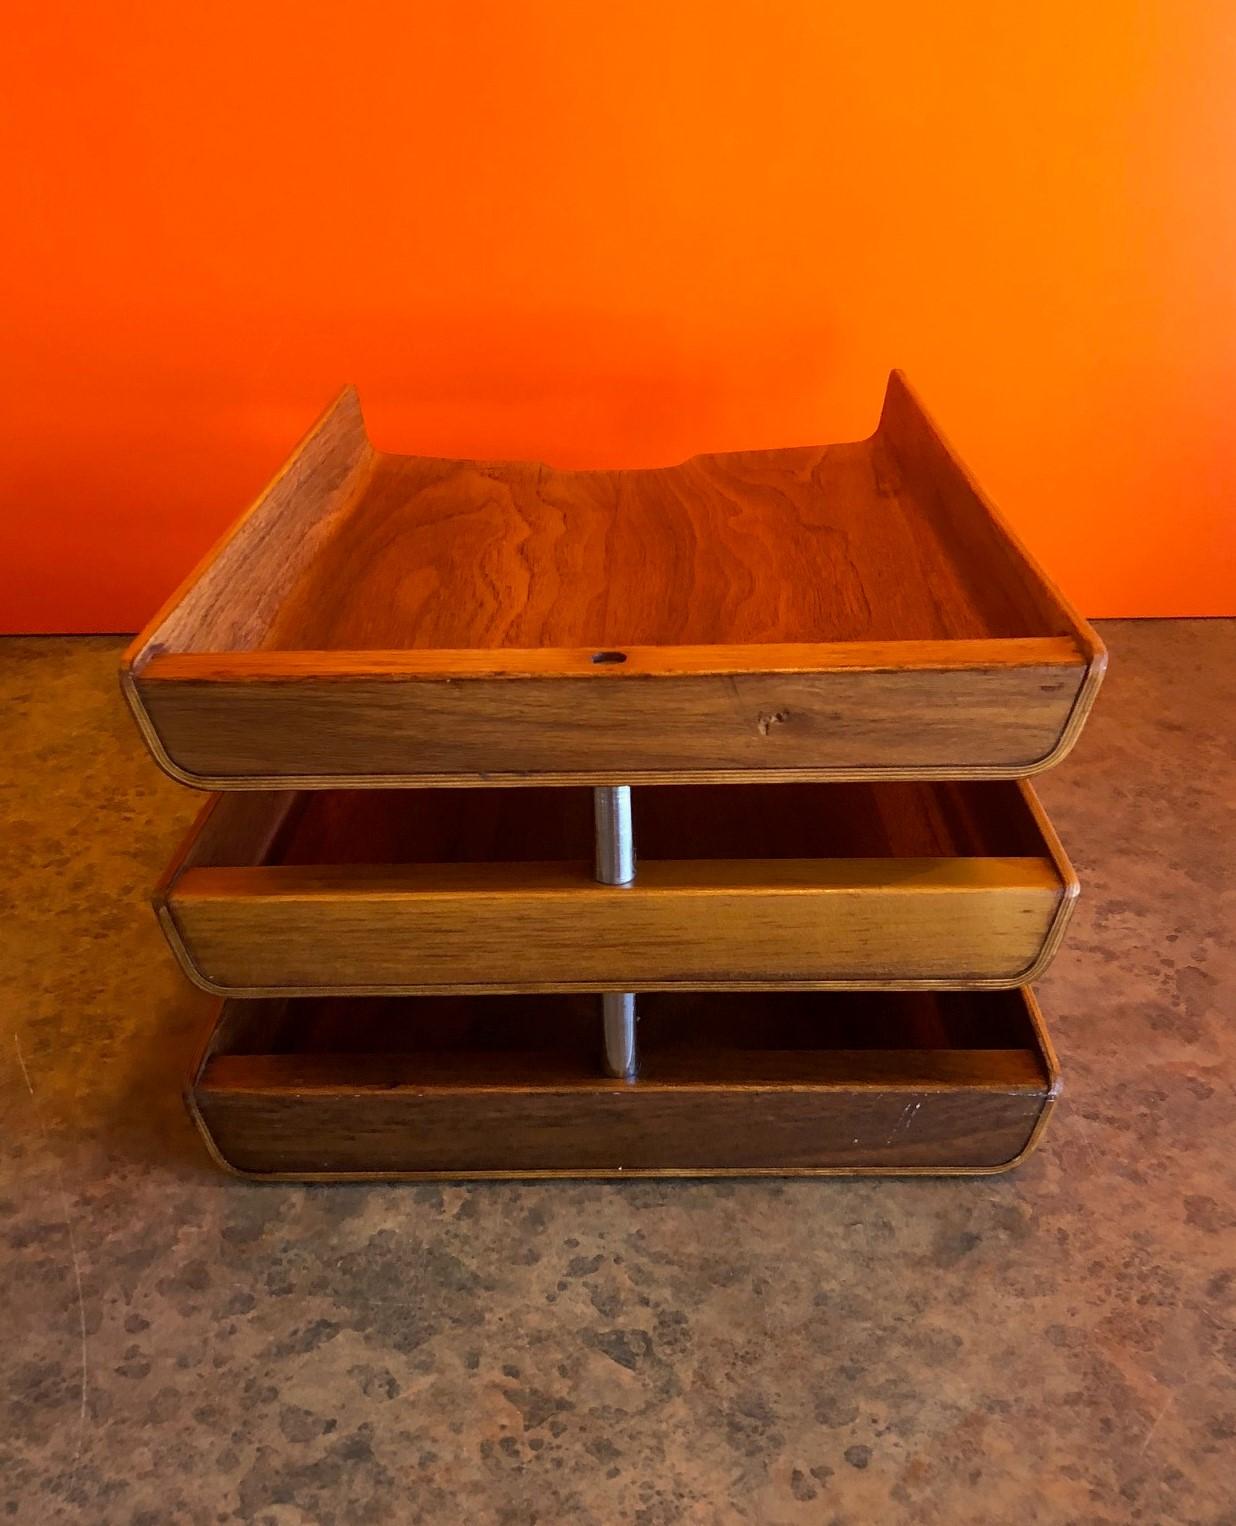 20th Century Molded Teak Plywood Triple Letter Tray by Martin Aberg for Rainbow of Sweden